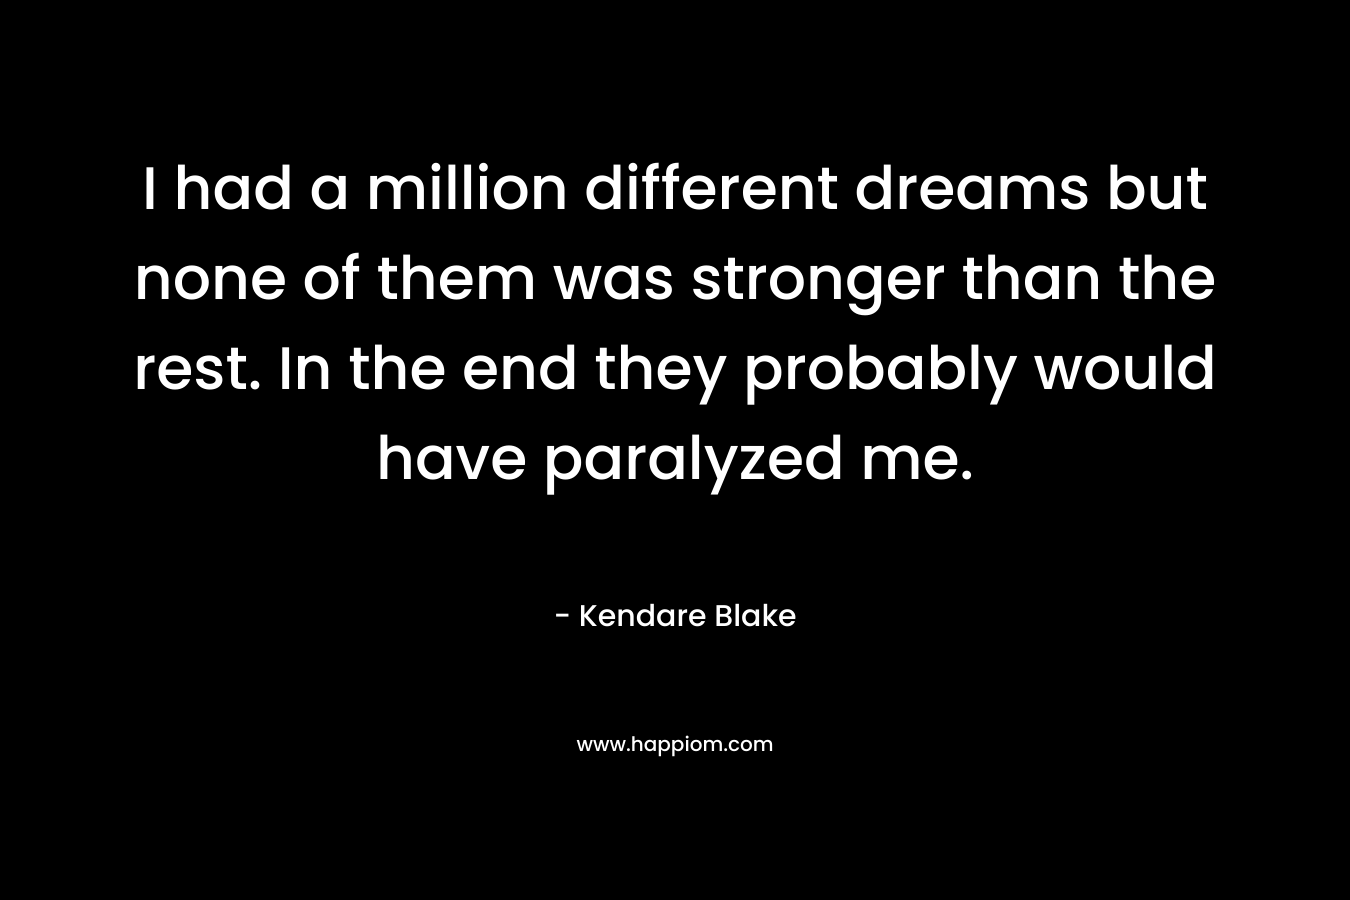 I had a million different dreams but none of them was stronger than the rest. In the end they probably would have paralyzed me.